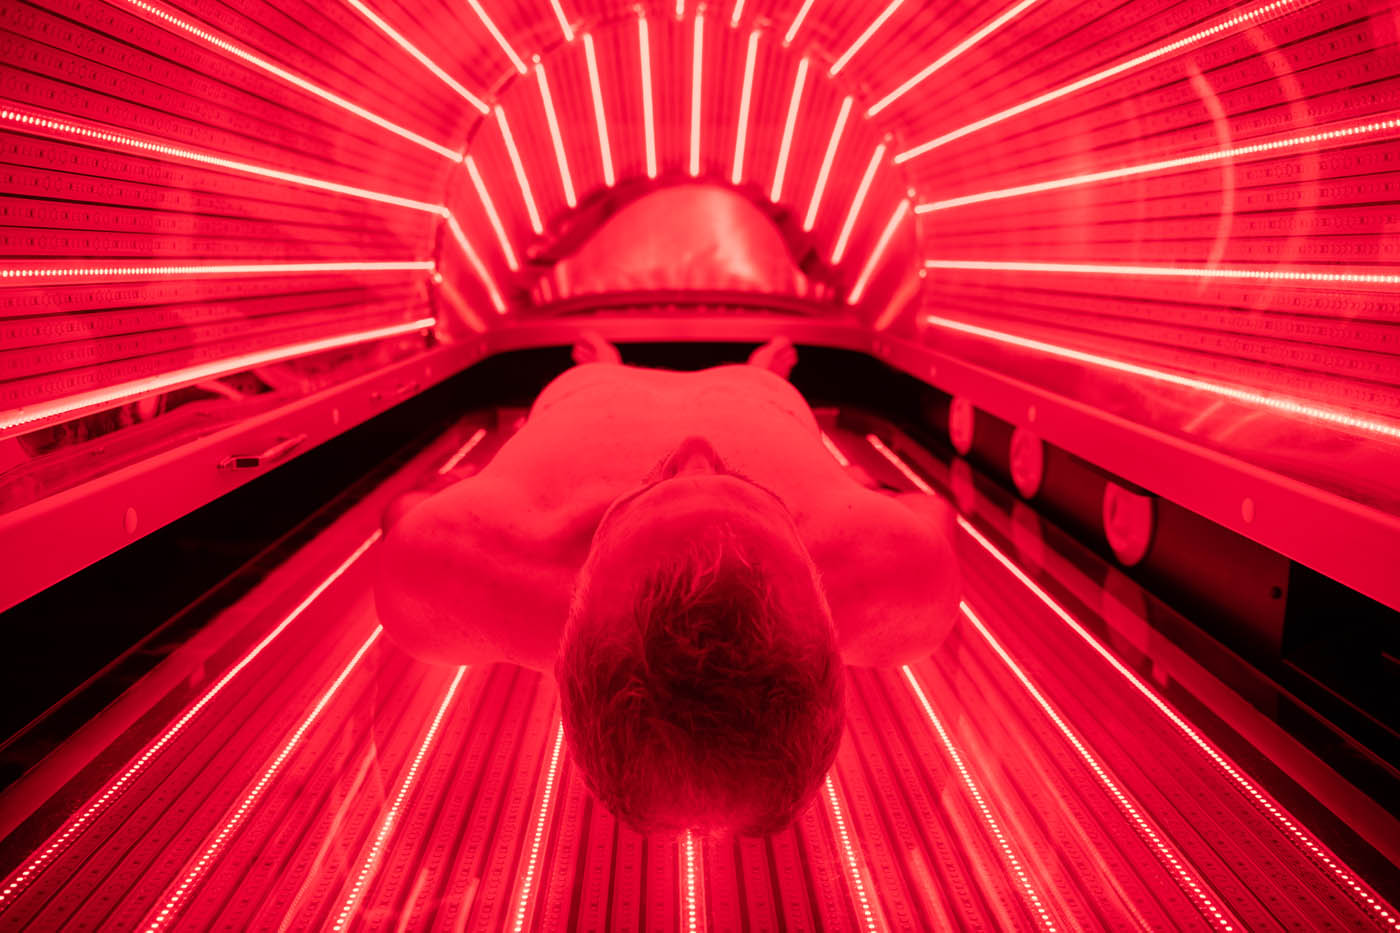 A man getting into a dark pod with bright red light, contact Light Lounge today for your infrared light therapy in Boulder.